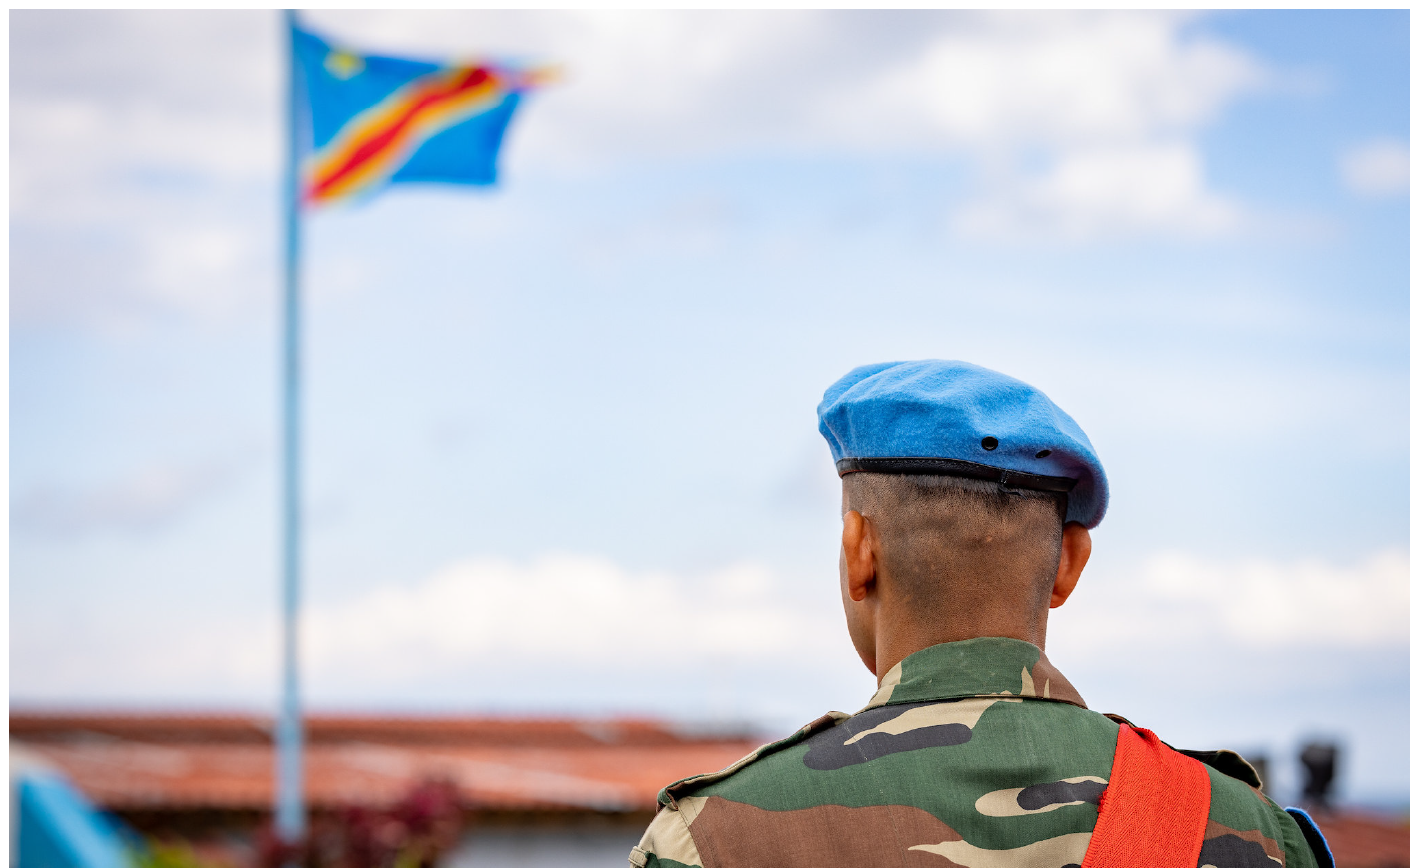 MONUSCO solider dressed in ceremonial uniform looking at a Democratic Republic of Congo flag on a flagpole.